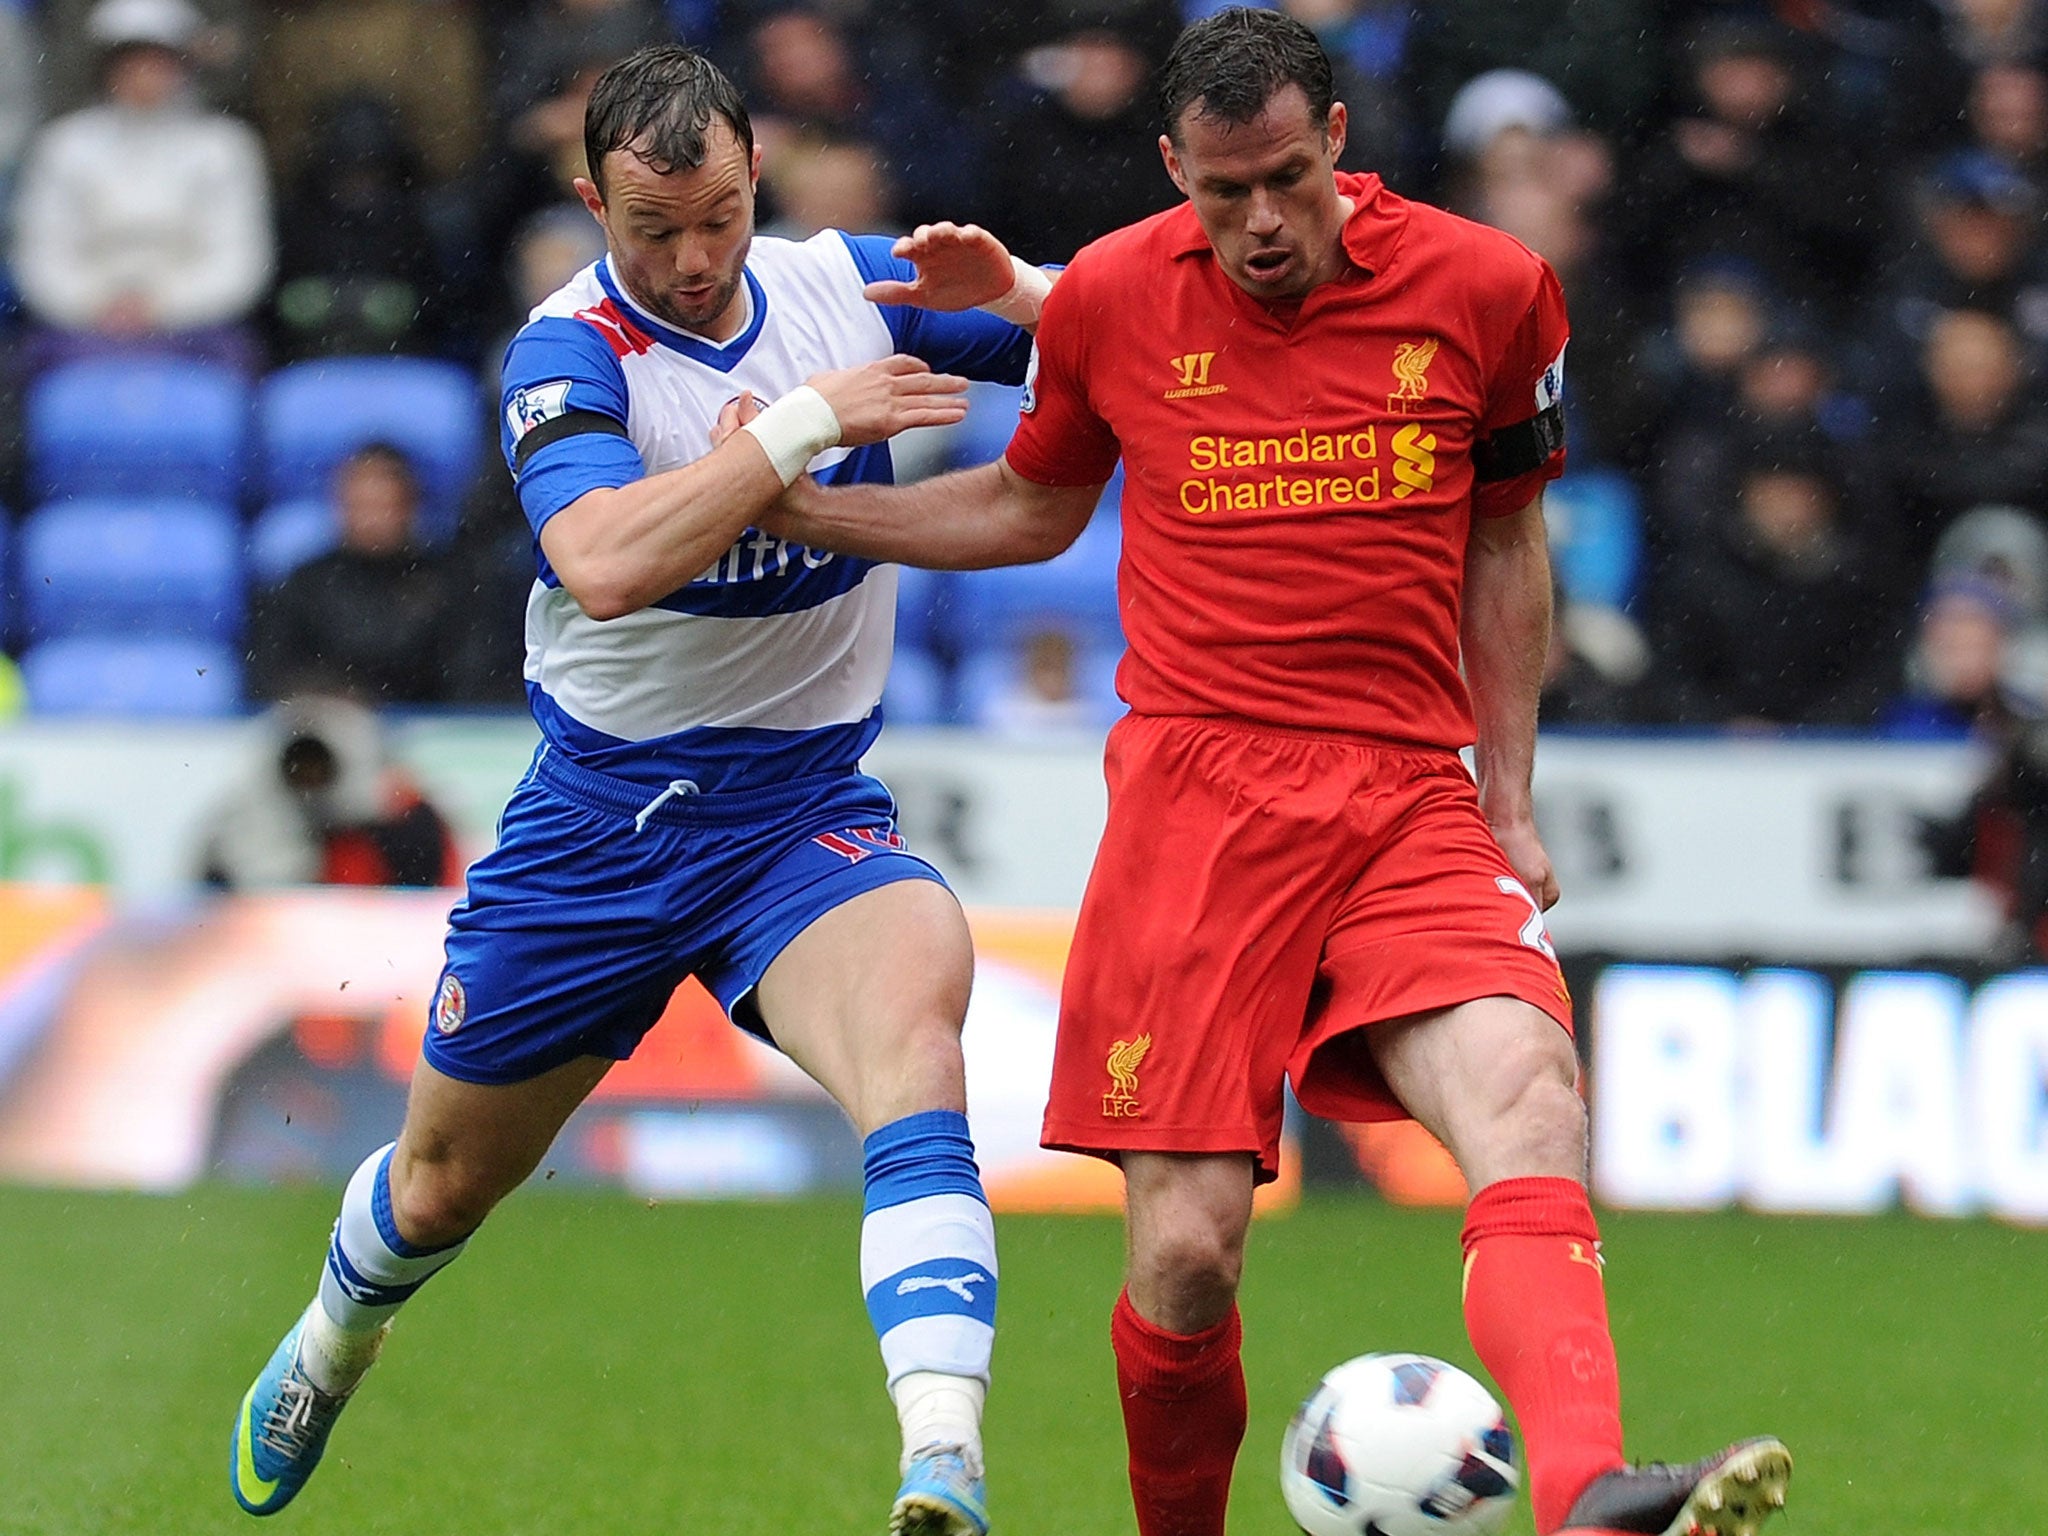 Jamie Carragher (R) of Liverpool competes with Noel Hunt of Reading